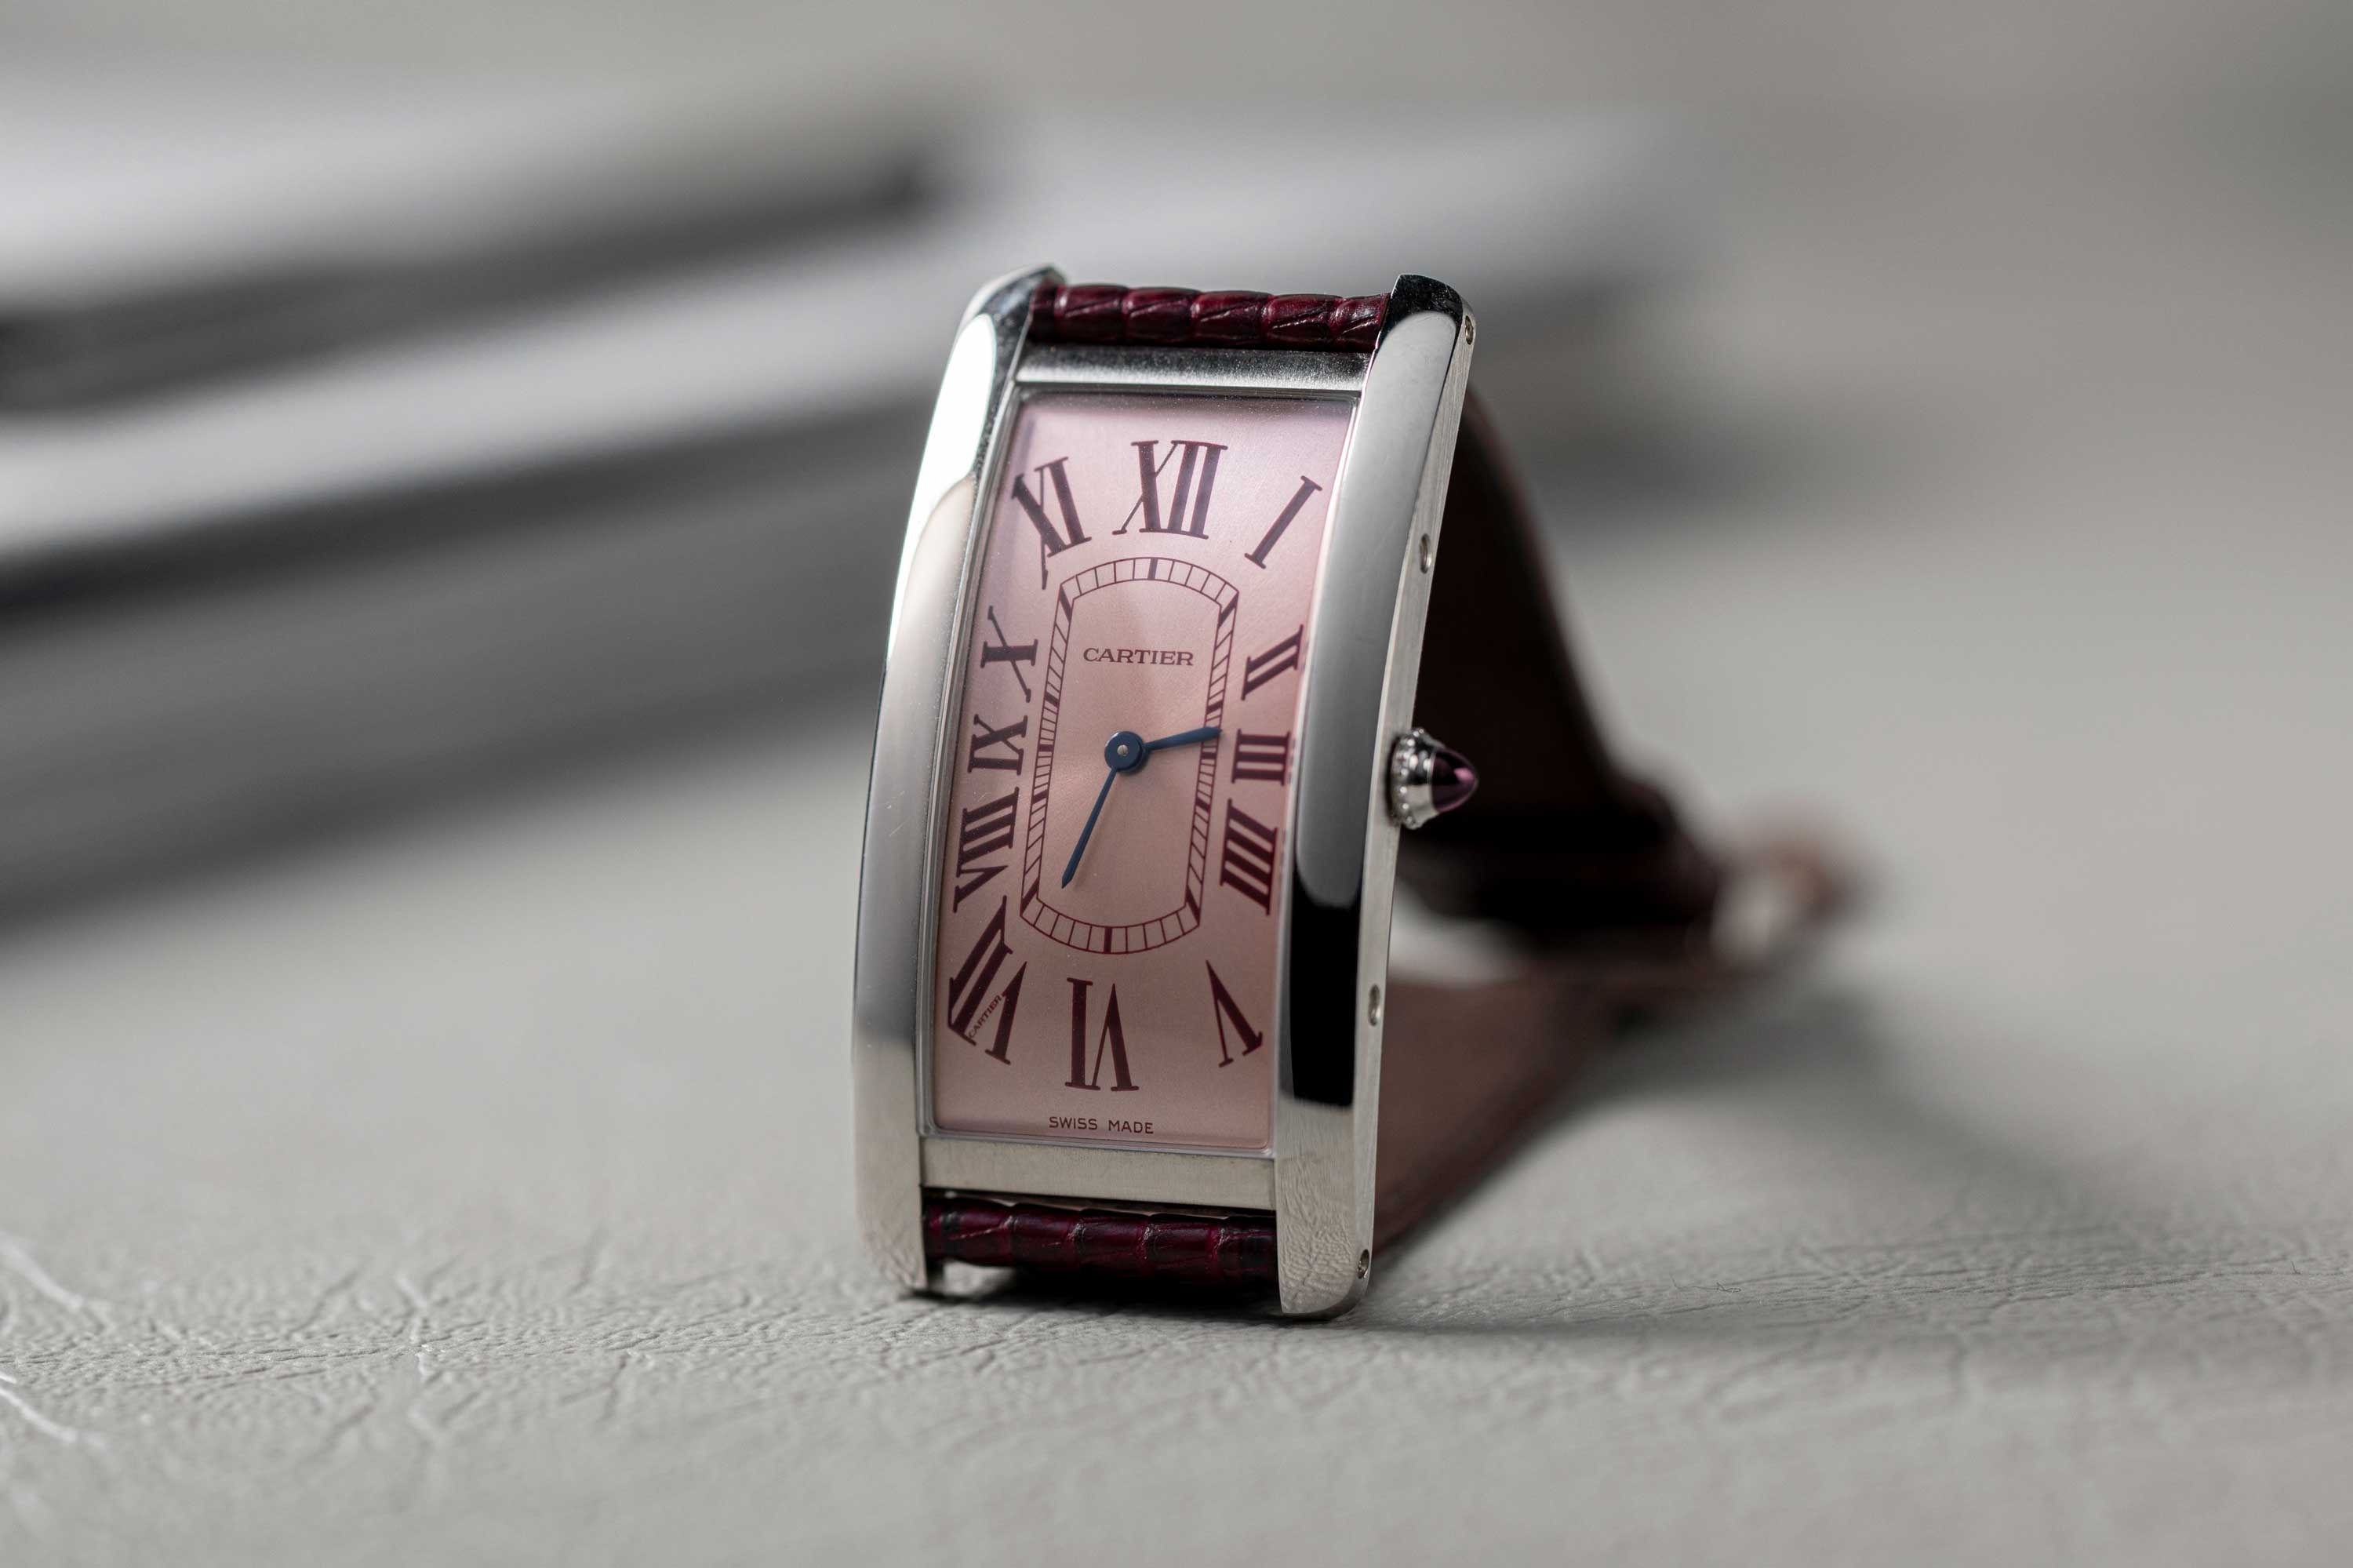 Cartier: Tank Cintree, Designed by Louis Cartier in 1916, An icon of modern watchmaking. 3000x2000 HD Wallpaper.